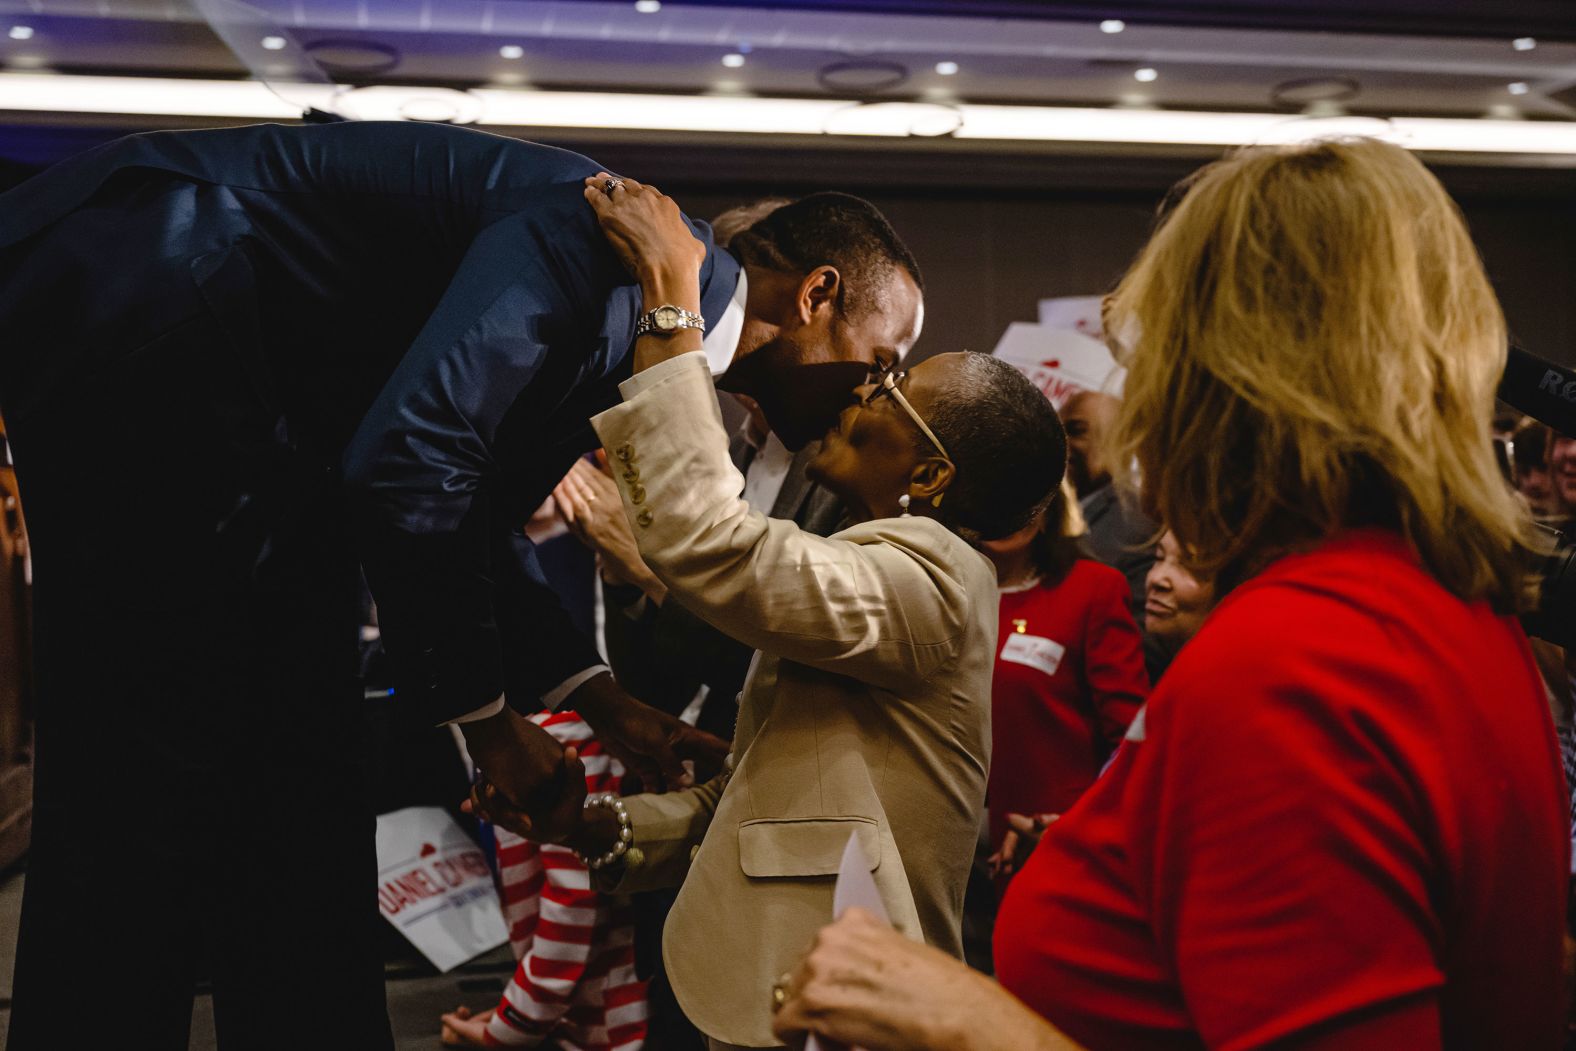 Kentucky Attorney General Daniel Cameron, who is running for governor, embraces his mother, Sandra, at an election-night watch party in Louisville on Tuesday, May 16. <a href="index.php?page=&url=https%3A%2F%2Fwww.cnn.com%2F2023%2F05%2F16%2Fpolitics%2Fkentucky-governor-primary%2Findex.html" target="_blank">Cameron's victory in the Republican primary</a> sets up a highly anticipated clash this fall with Democratic Gov. Andy Beshear.